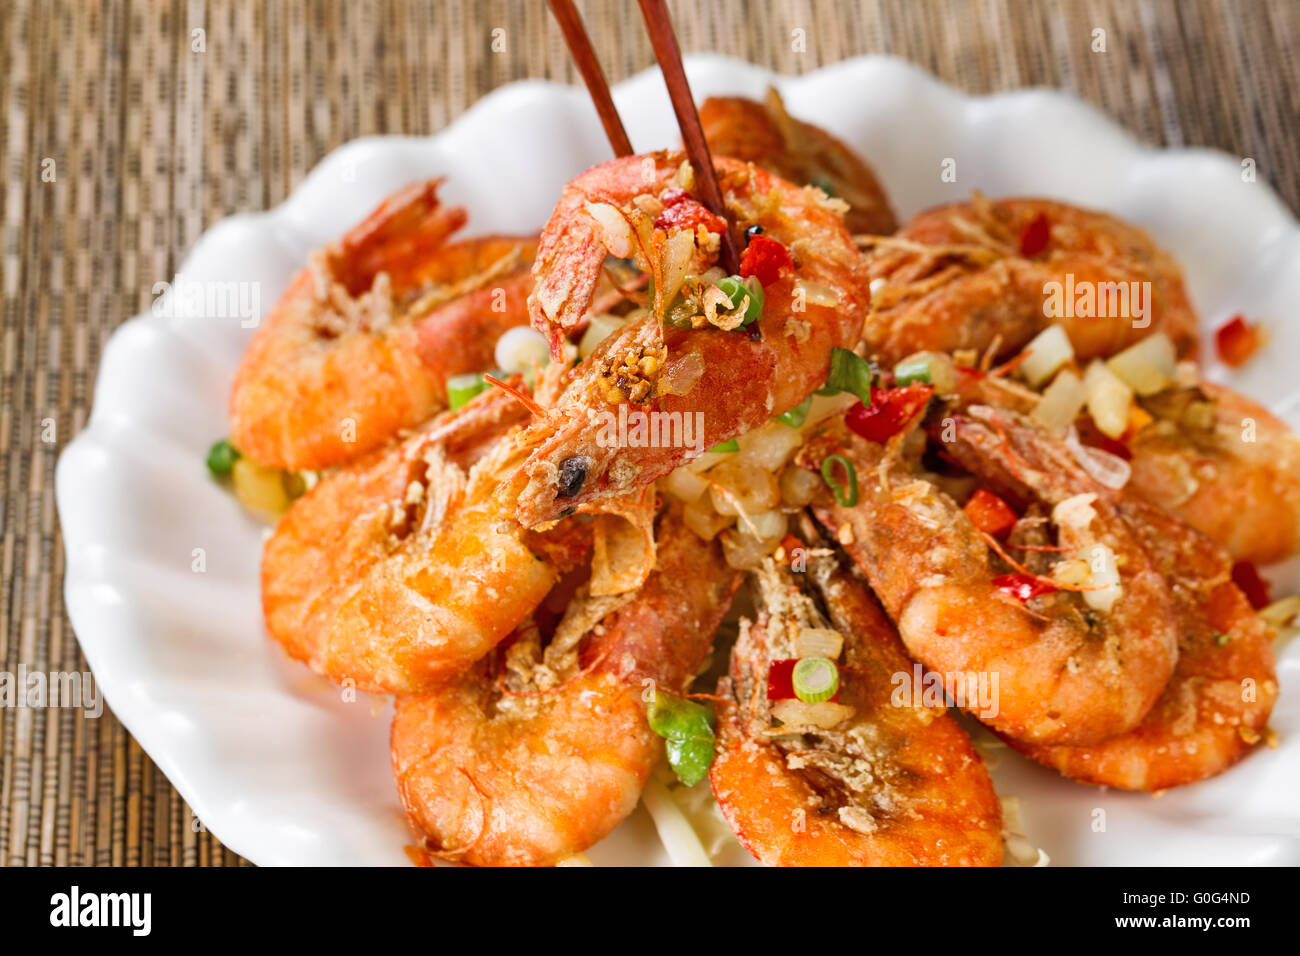 Fried bread coated shrimp and garnishes on white serving plate ready to eat Stock Photo